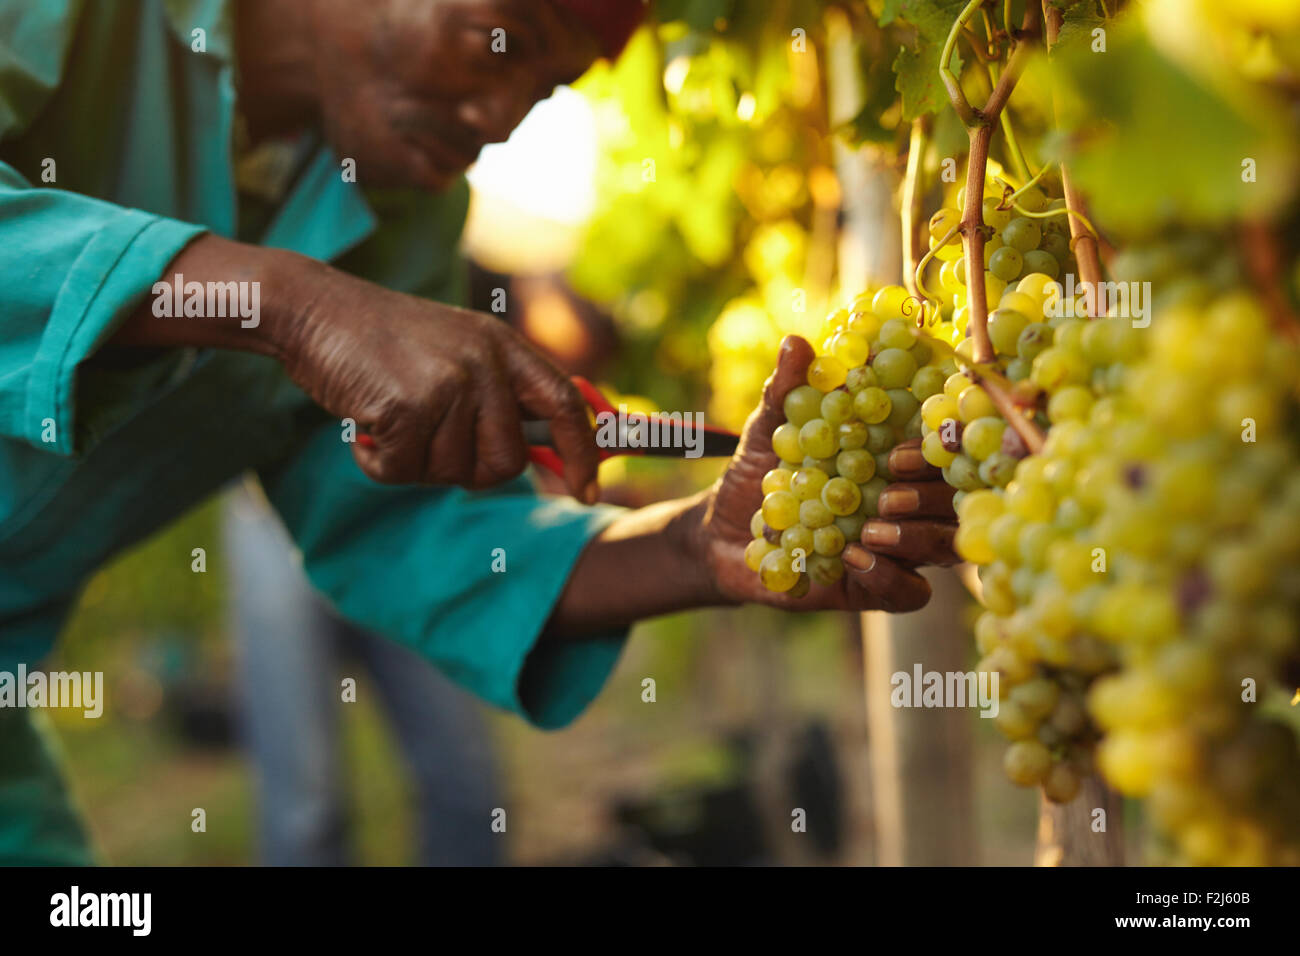 Close up shot of a man picking grapes during wine harvest in vineyard. Cutting bunch of grapes from vine. Stock Photo